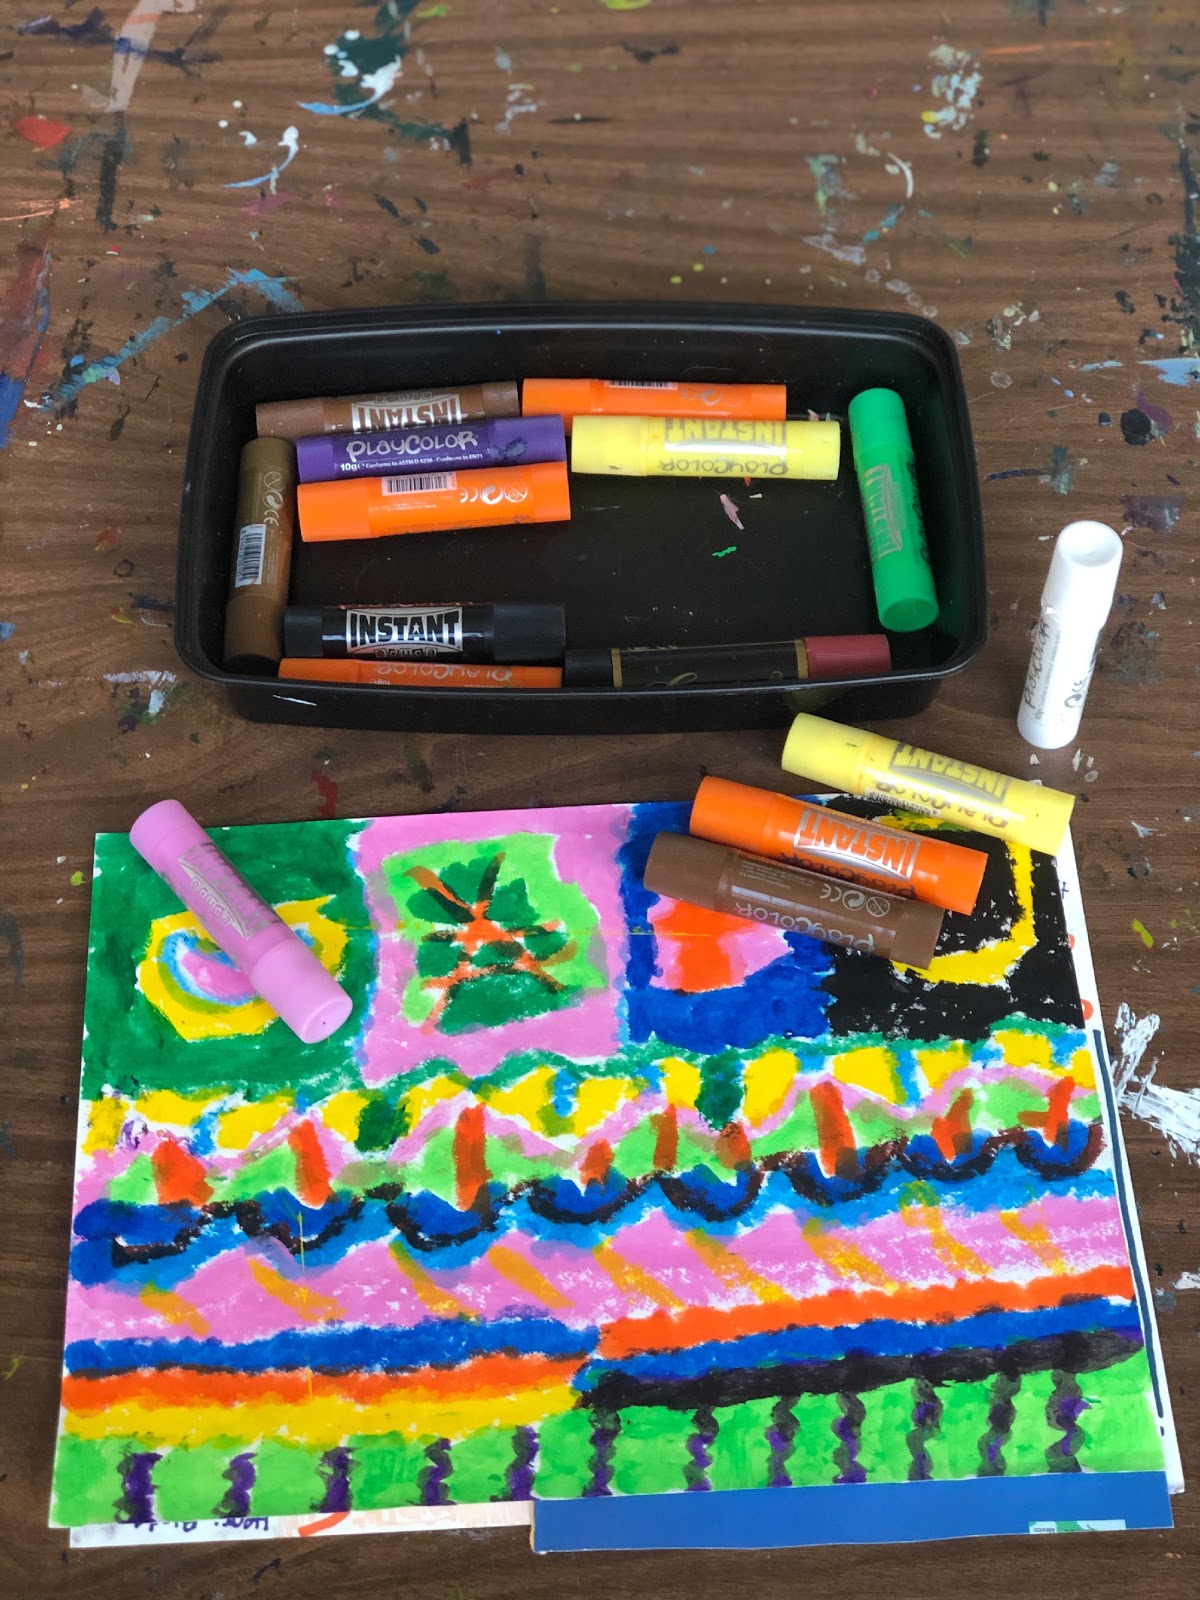 How to Create an Art Therapy Supplies Kit for Art Therapy Activities